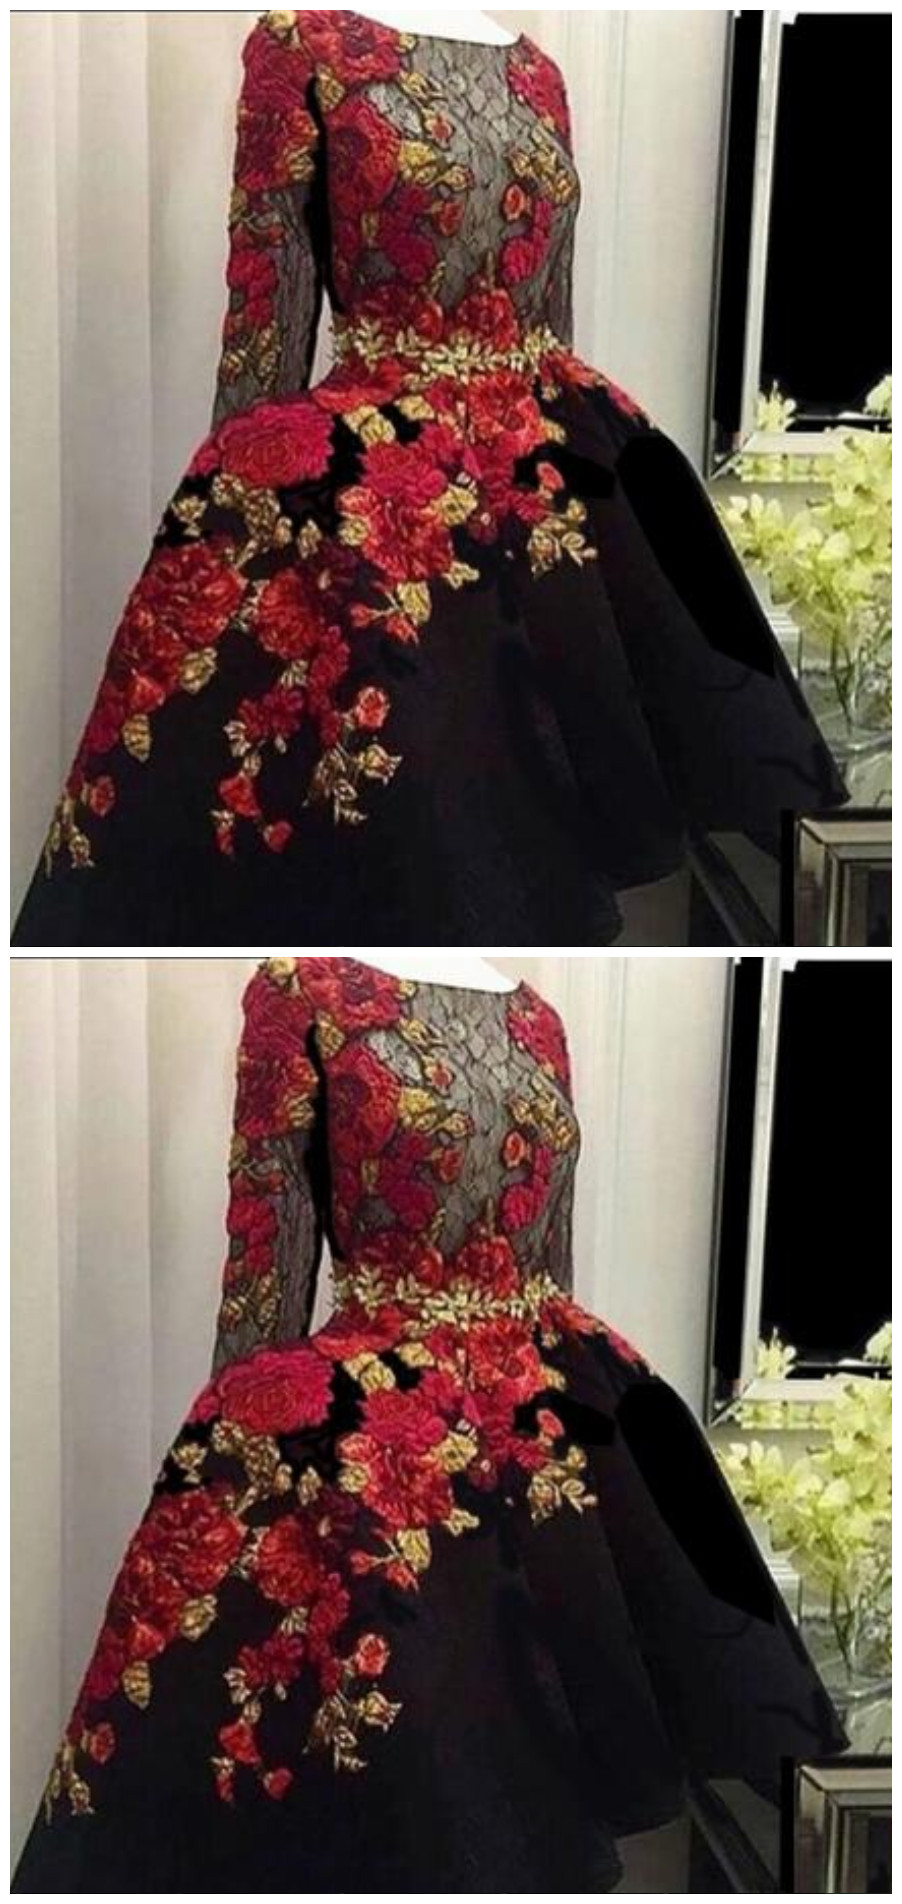 Charming Black Embroidery Lace Long Sleeve Prom Dresses 2018 Applique Satin Hi Lo Sheer See Through Custom Made Evening Dress